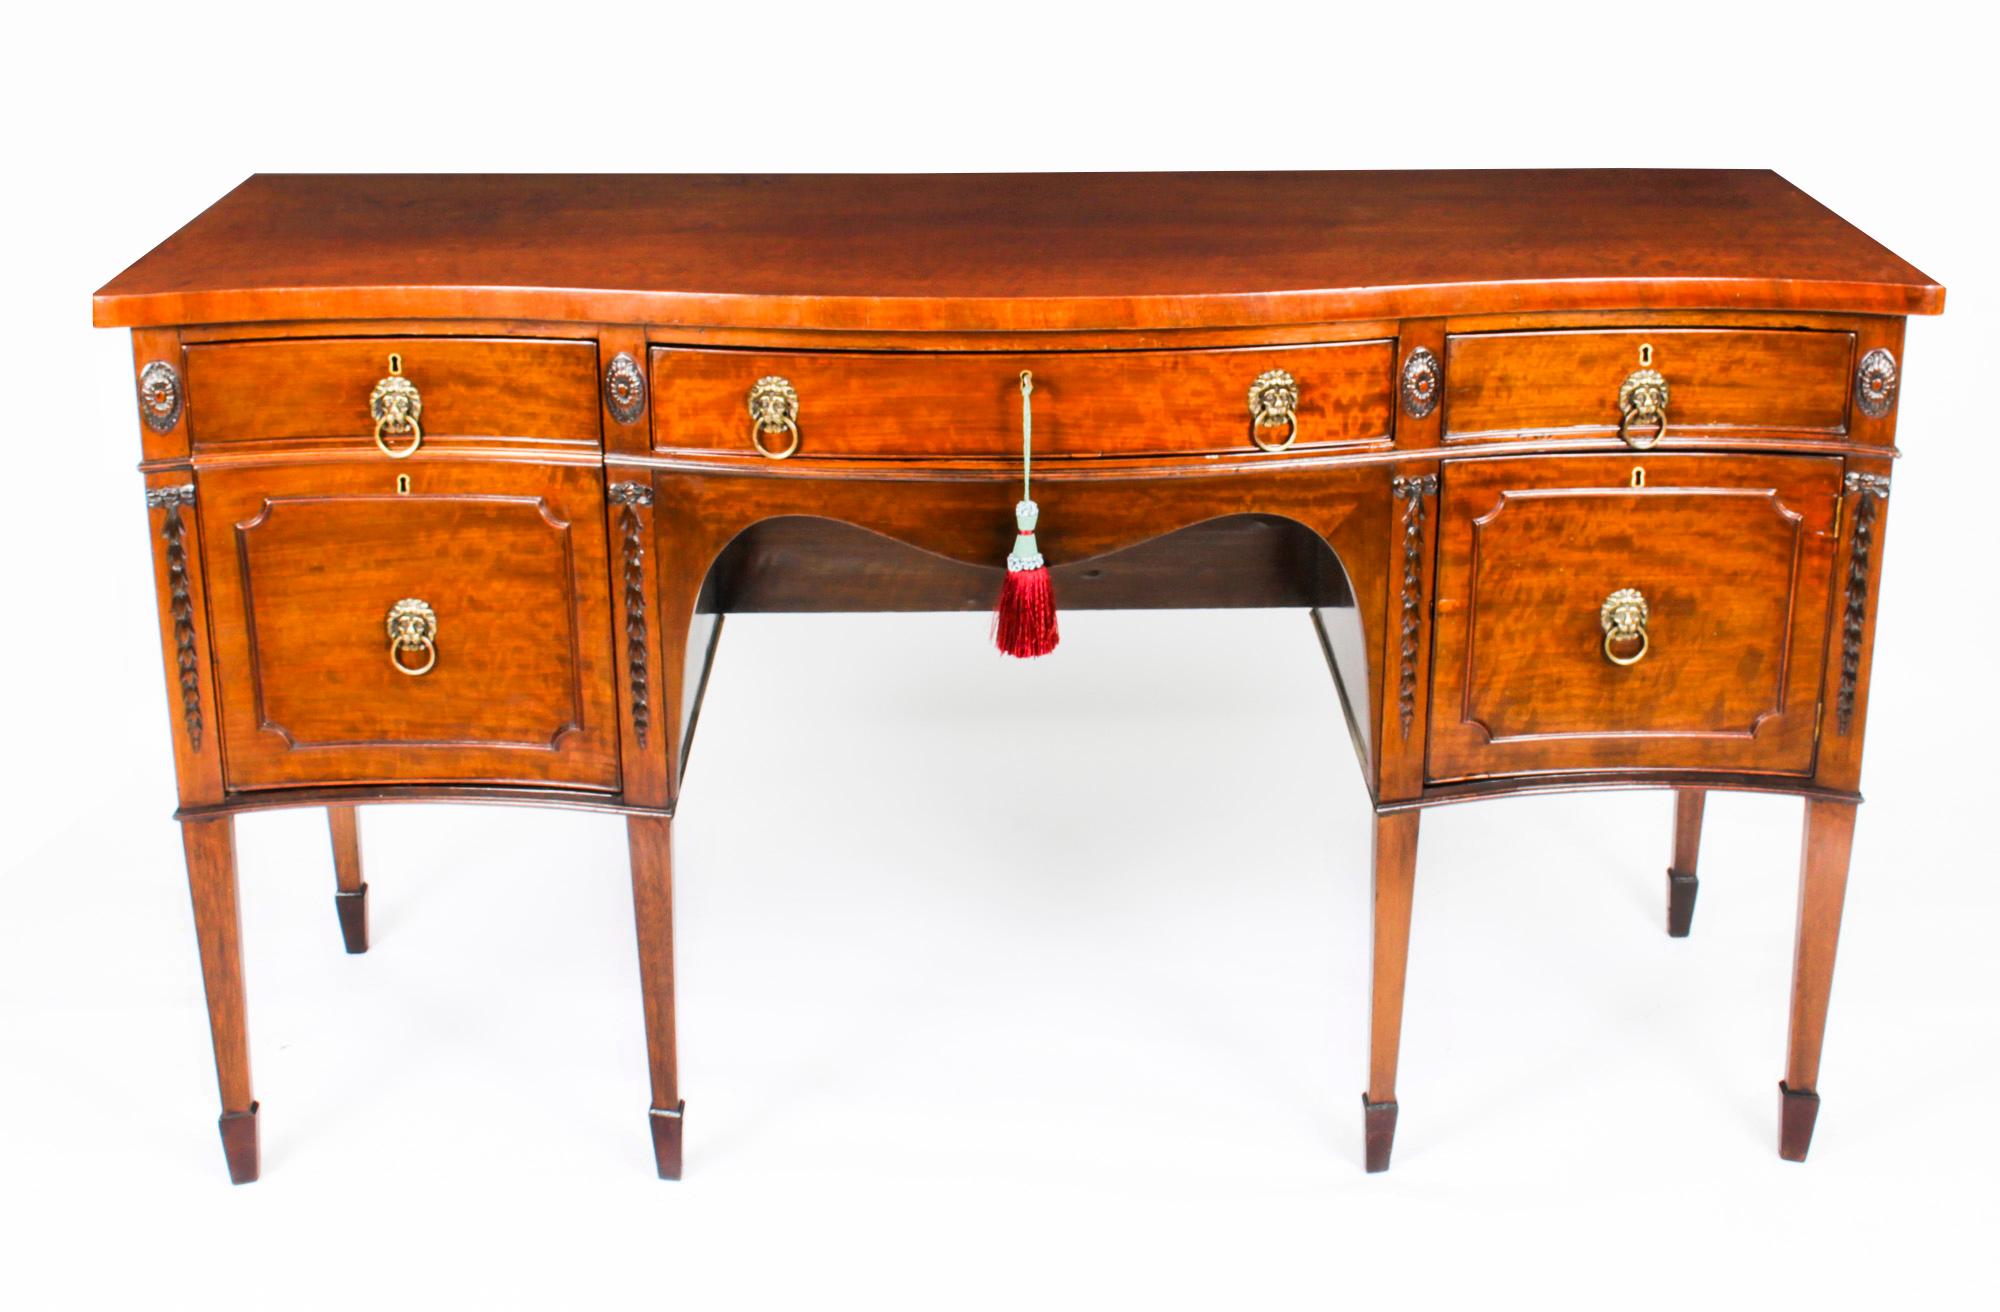 This is a superb antique George III inlaid flame mahogany serpentine sideboard, circa 1820 in date.
 
The sideboard features a shaped top with a central drawer and two right hand side frieze drawers with a double depth drawer on the left hand side.